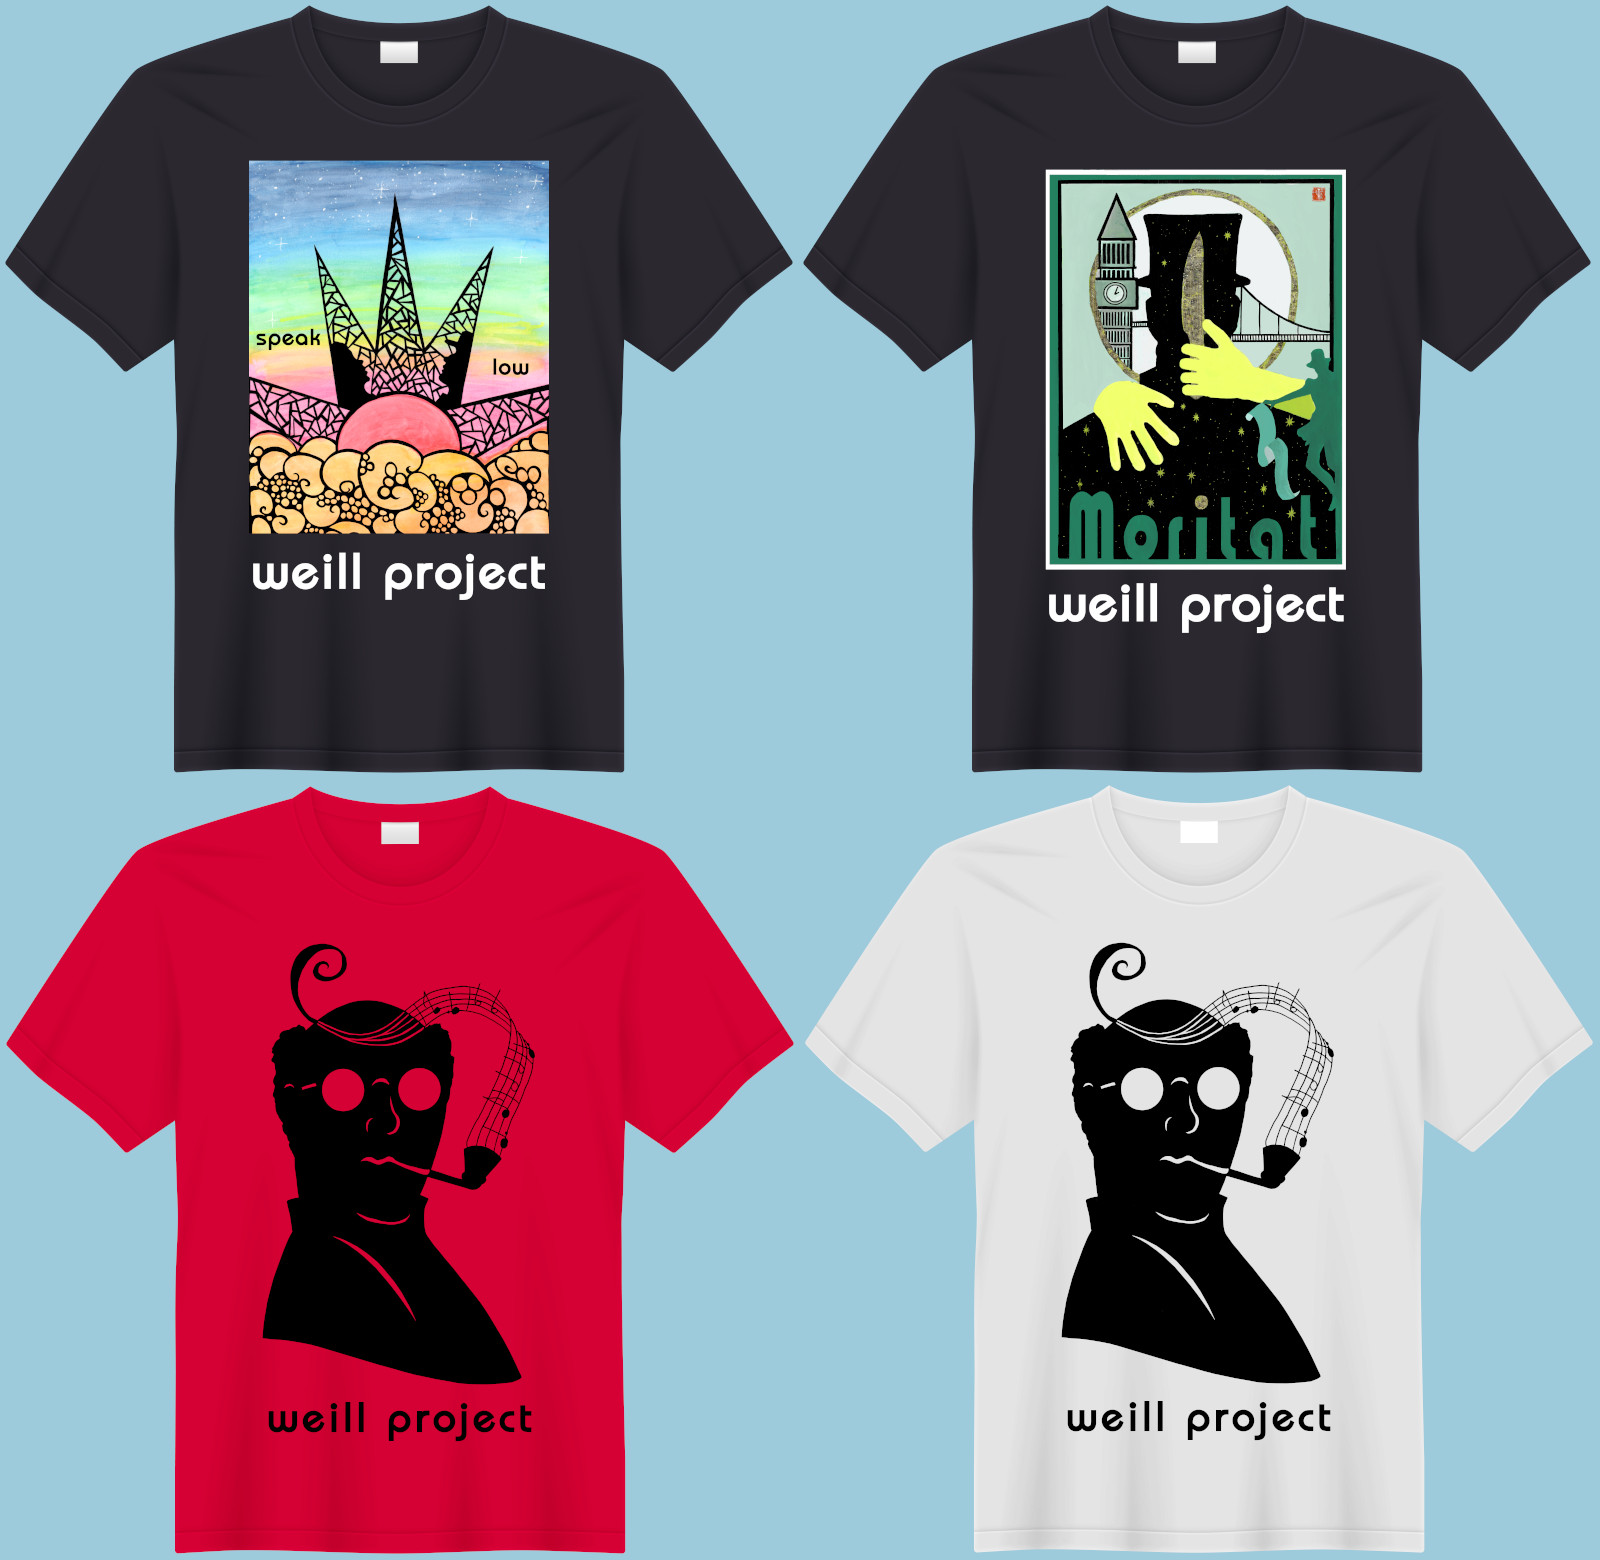 Picture of four different T-shirt designs